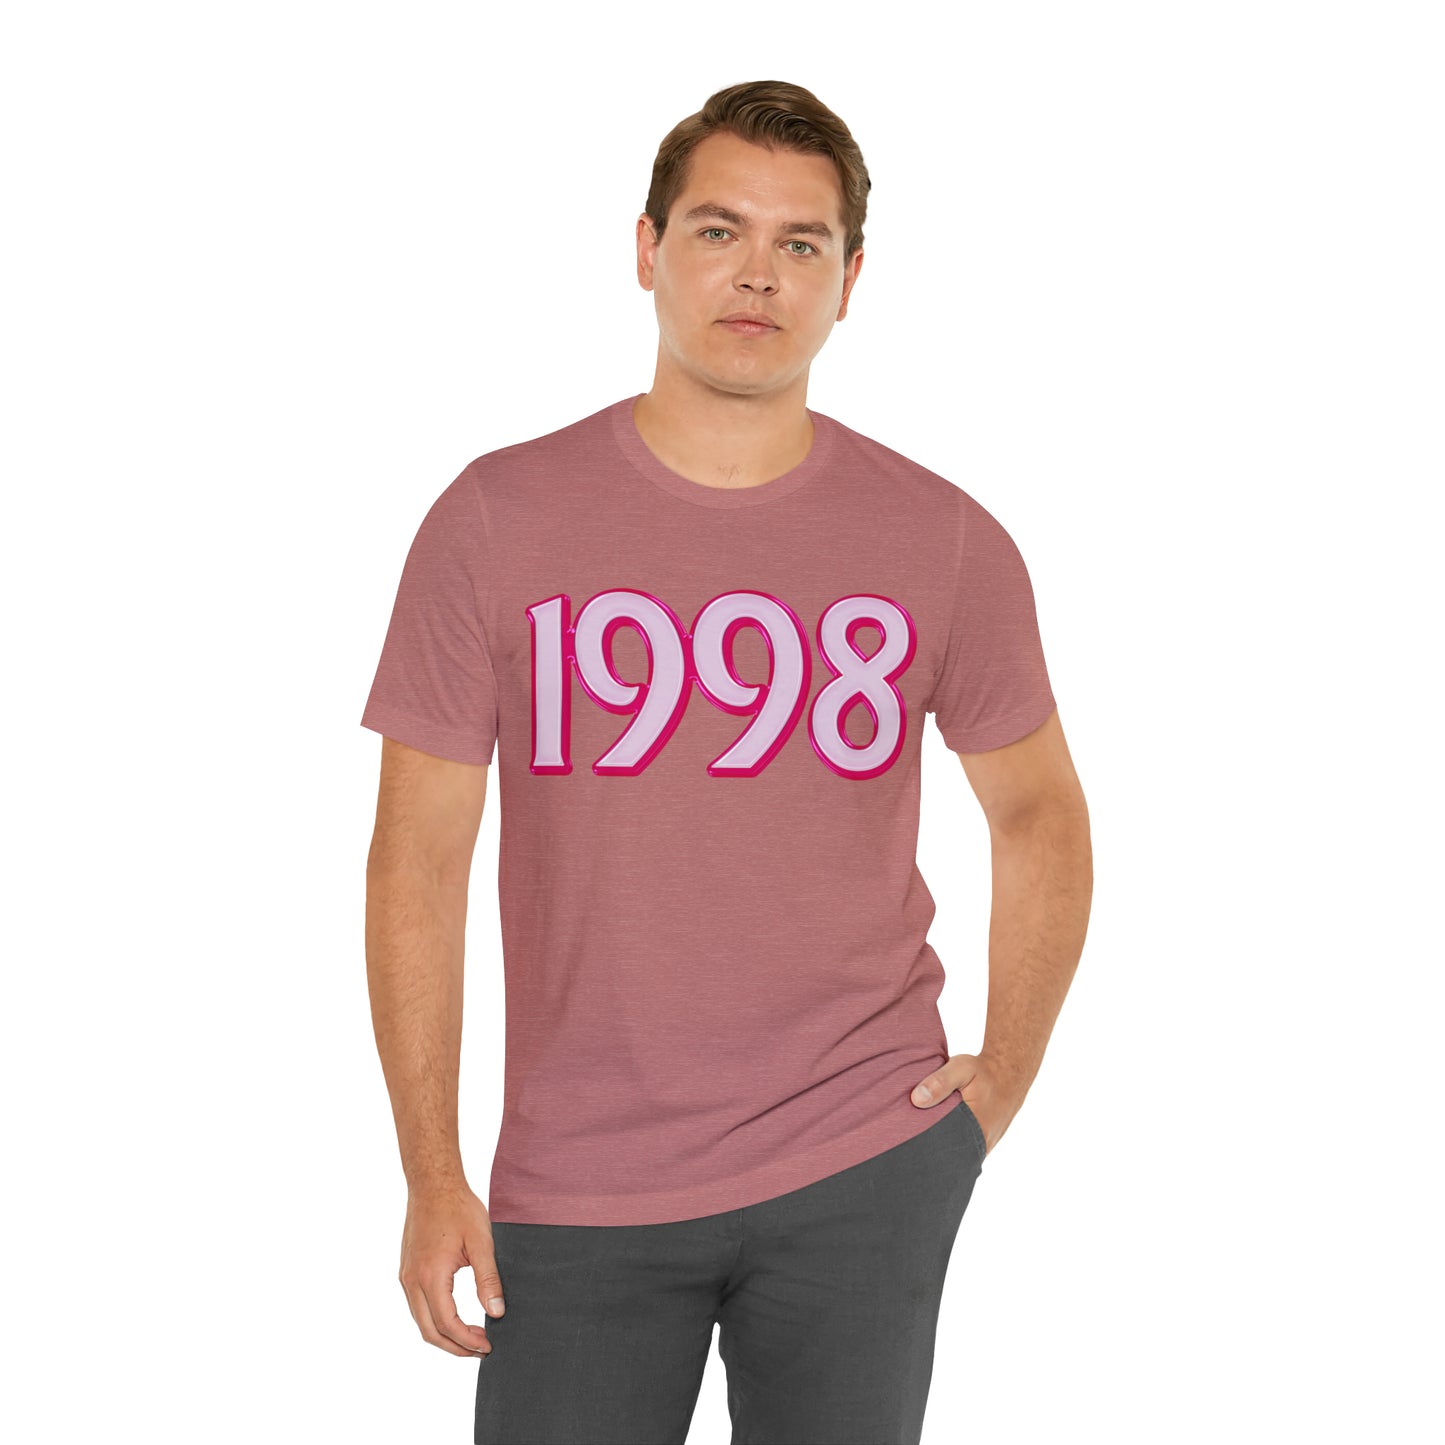 1998 Pink shirt for Lady Birthday Gift, 1998 Retro Number T shirt, 1998 Birthday Year Number shirt for Women, Pink Shirt For Women, T814